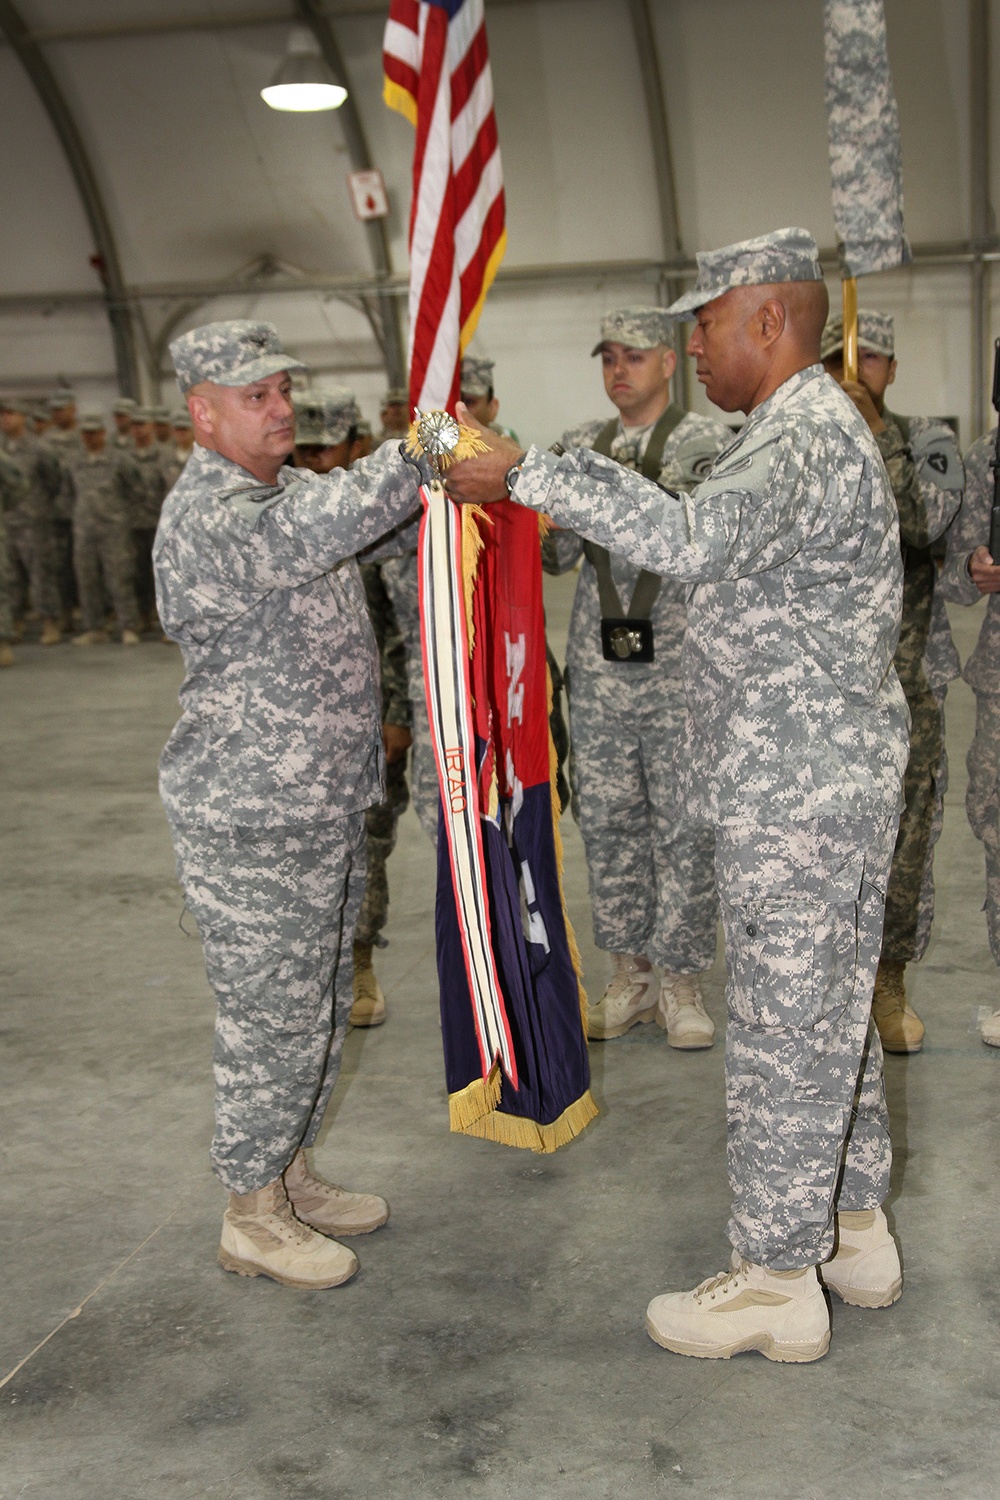 Texas Aviation Brigade turns Kuwait mission over to New York